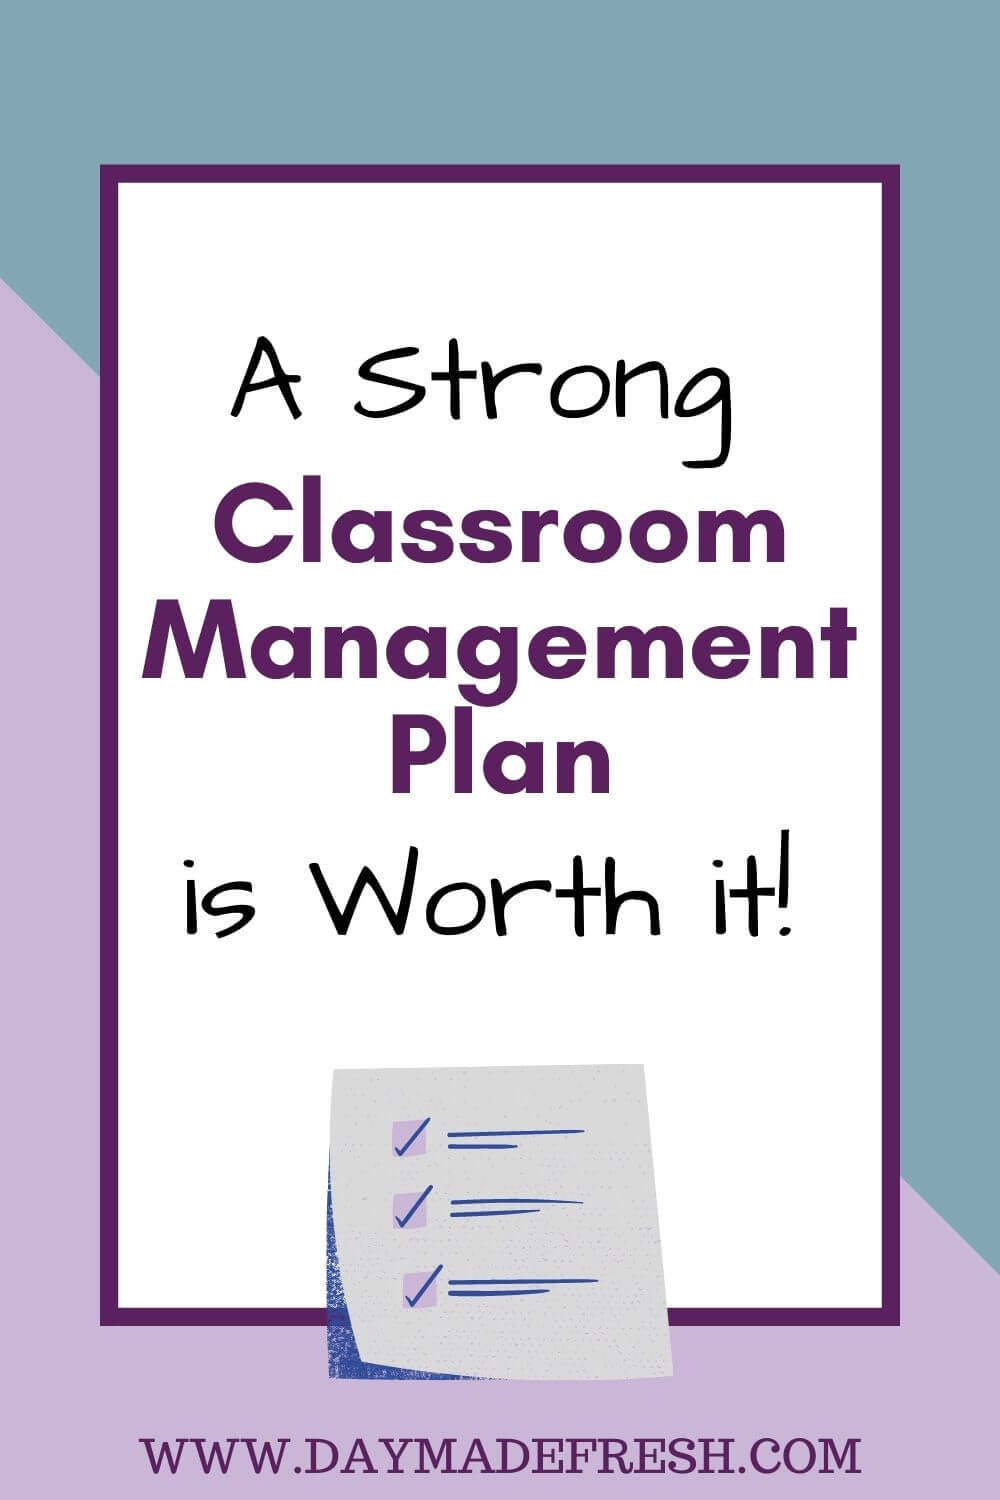 "A Strong Classroom Management Plan, is Worth it!" With checklist. 